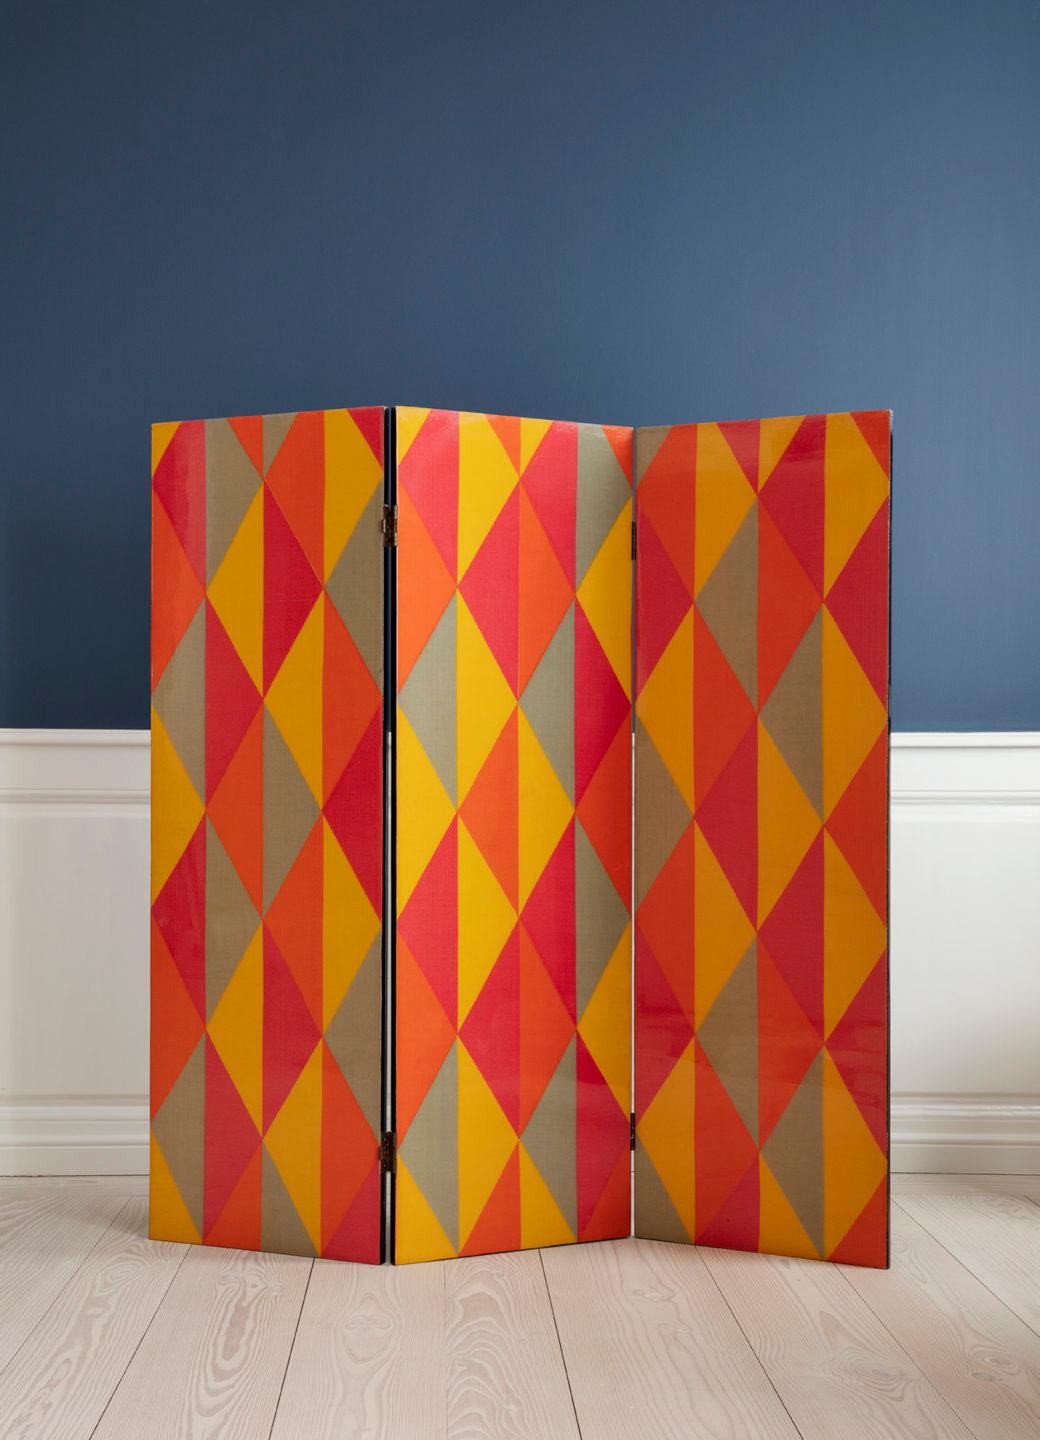 Paravent with harlequin pattern, made of lacquered fabric.

France, 1950s

Measures: H 130 x W 126 cm.